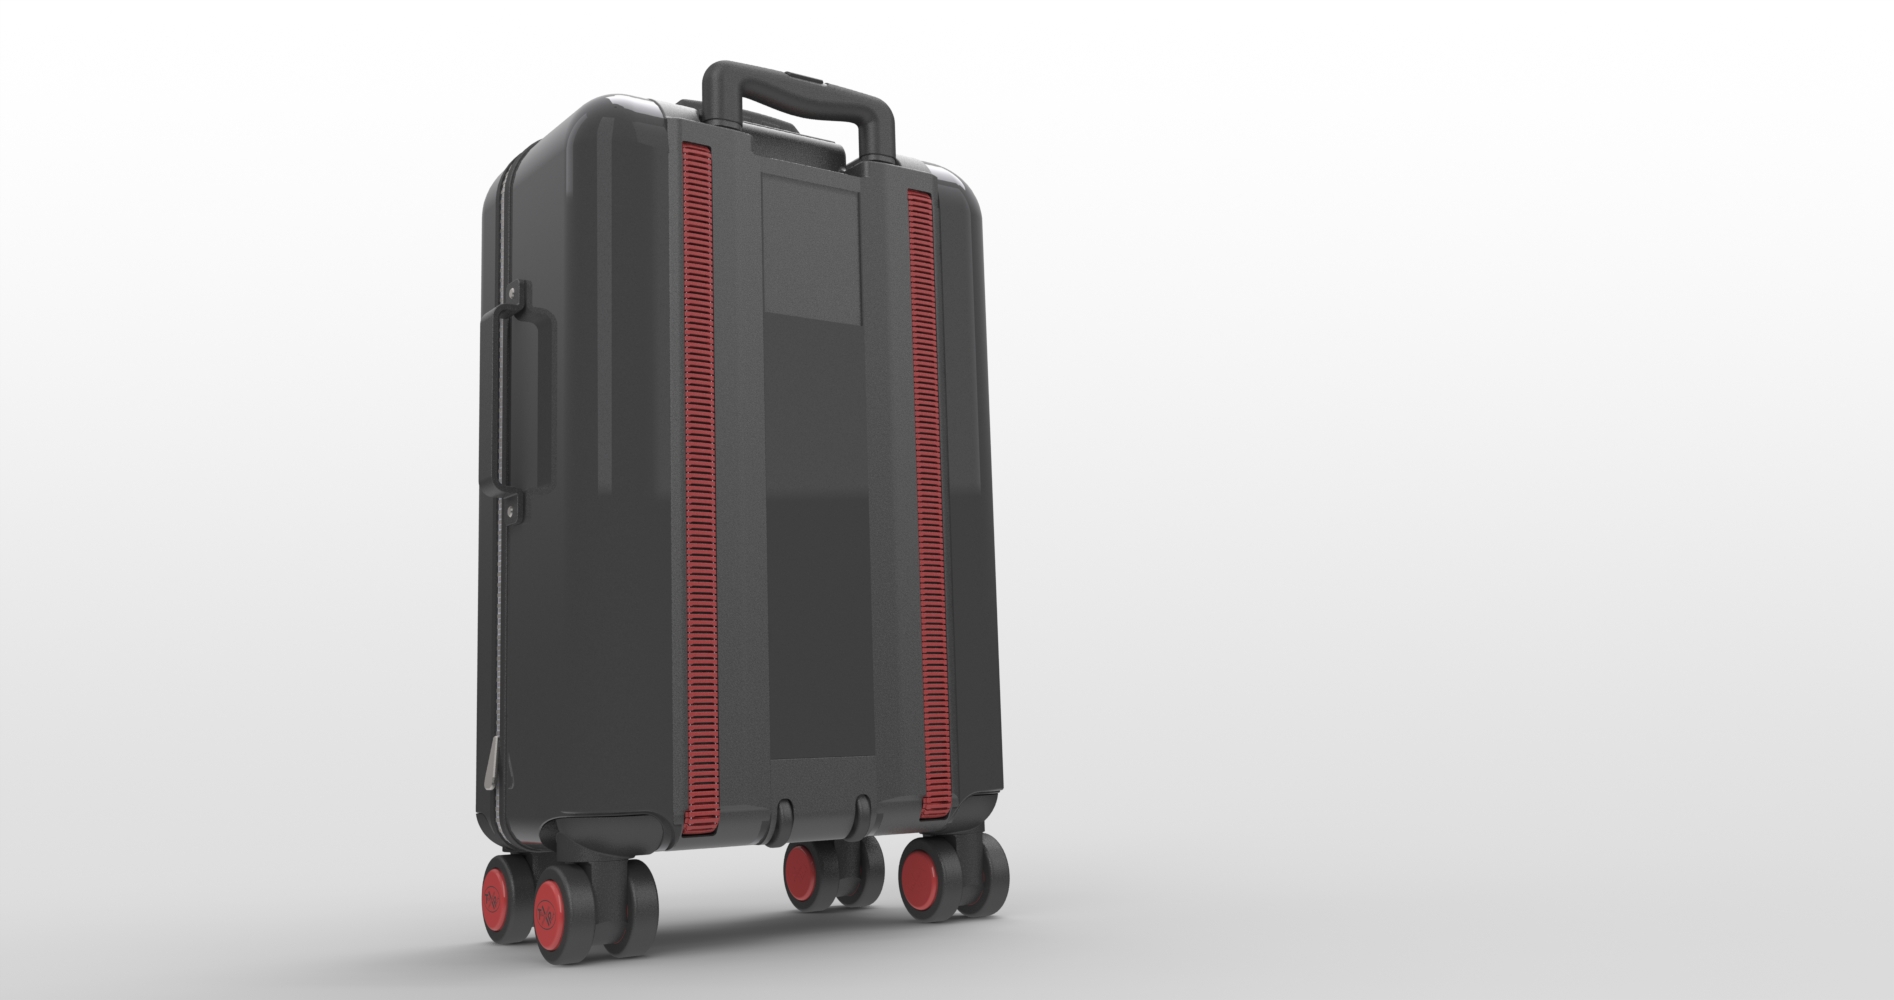 TraxPack Launches Campaign for Suitcase that Climbs Stairs like a Tank